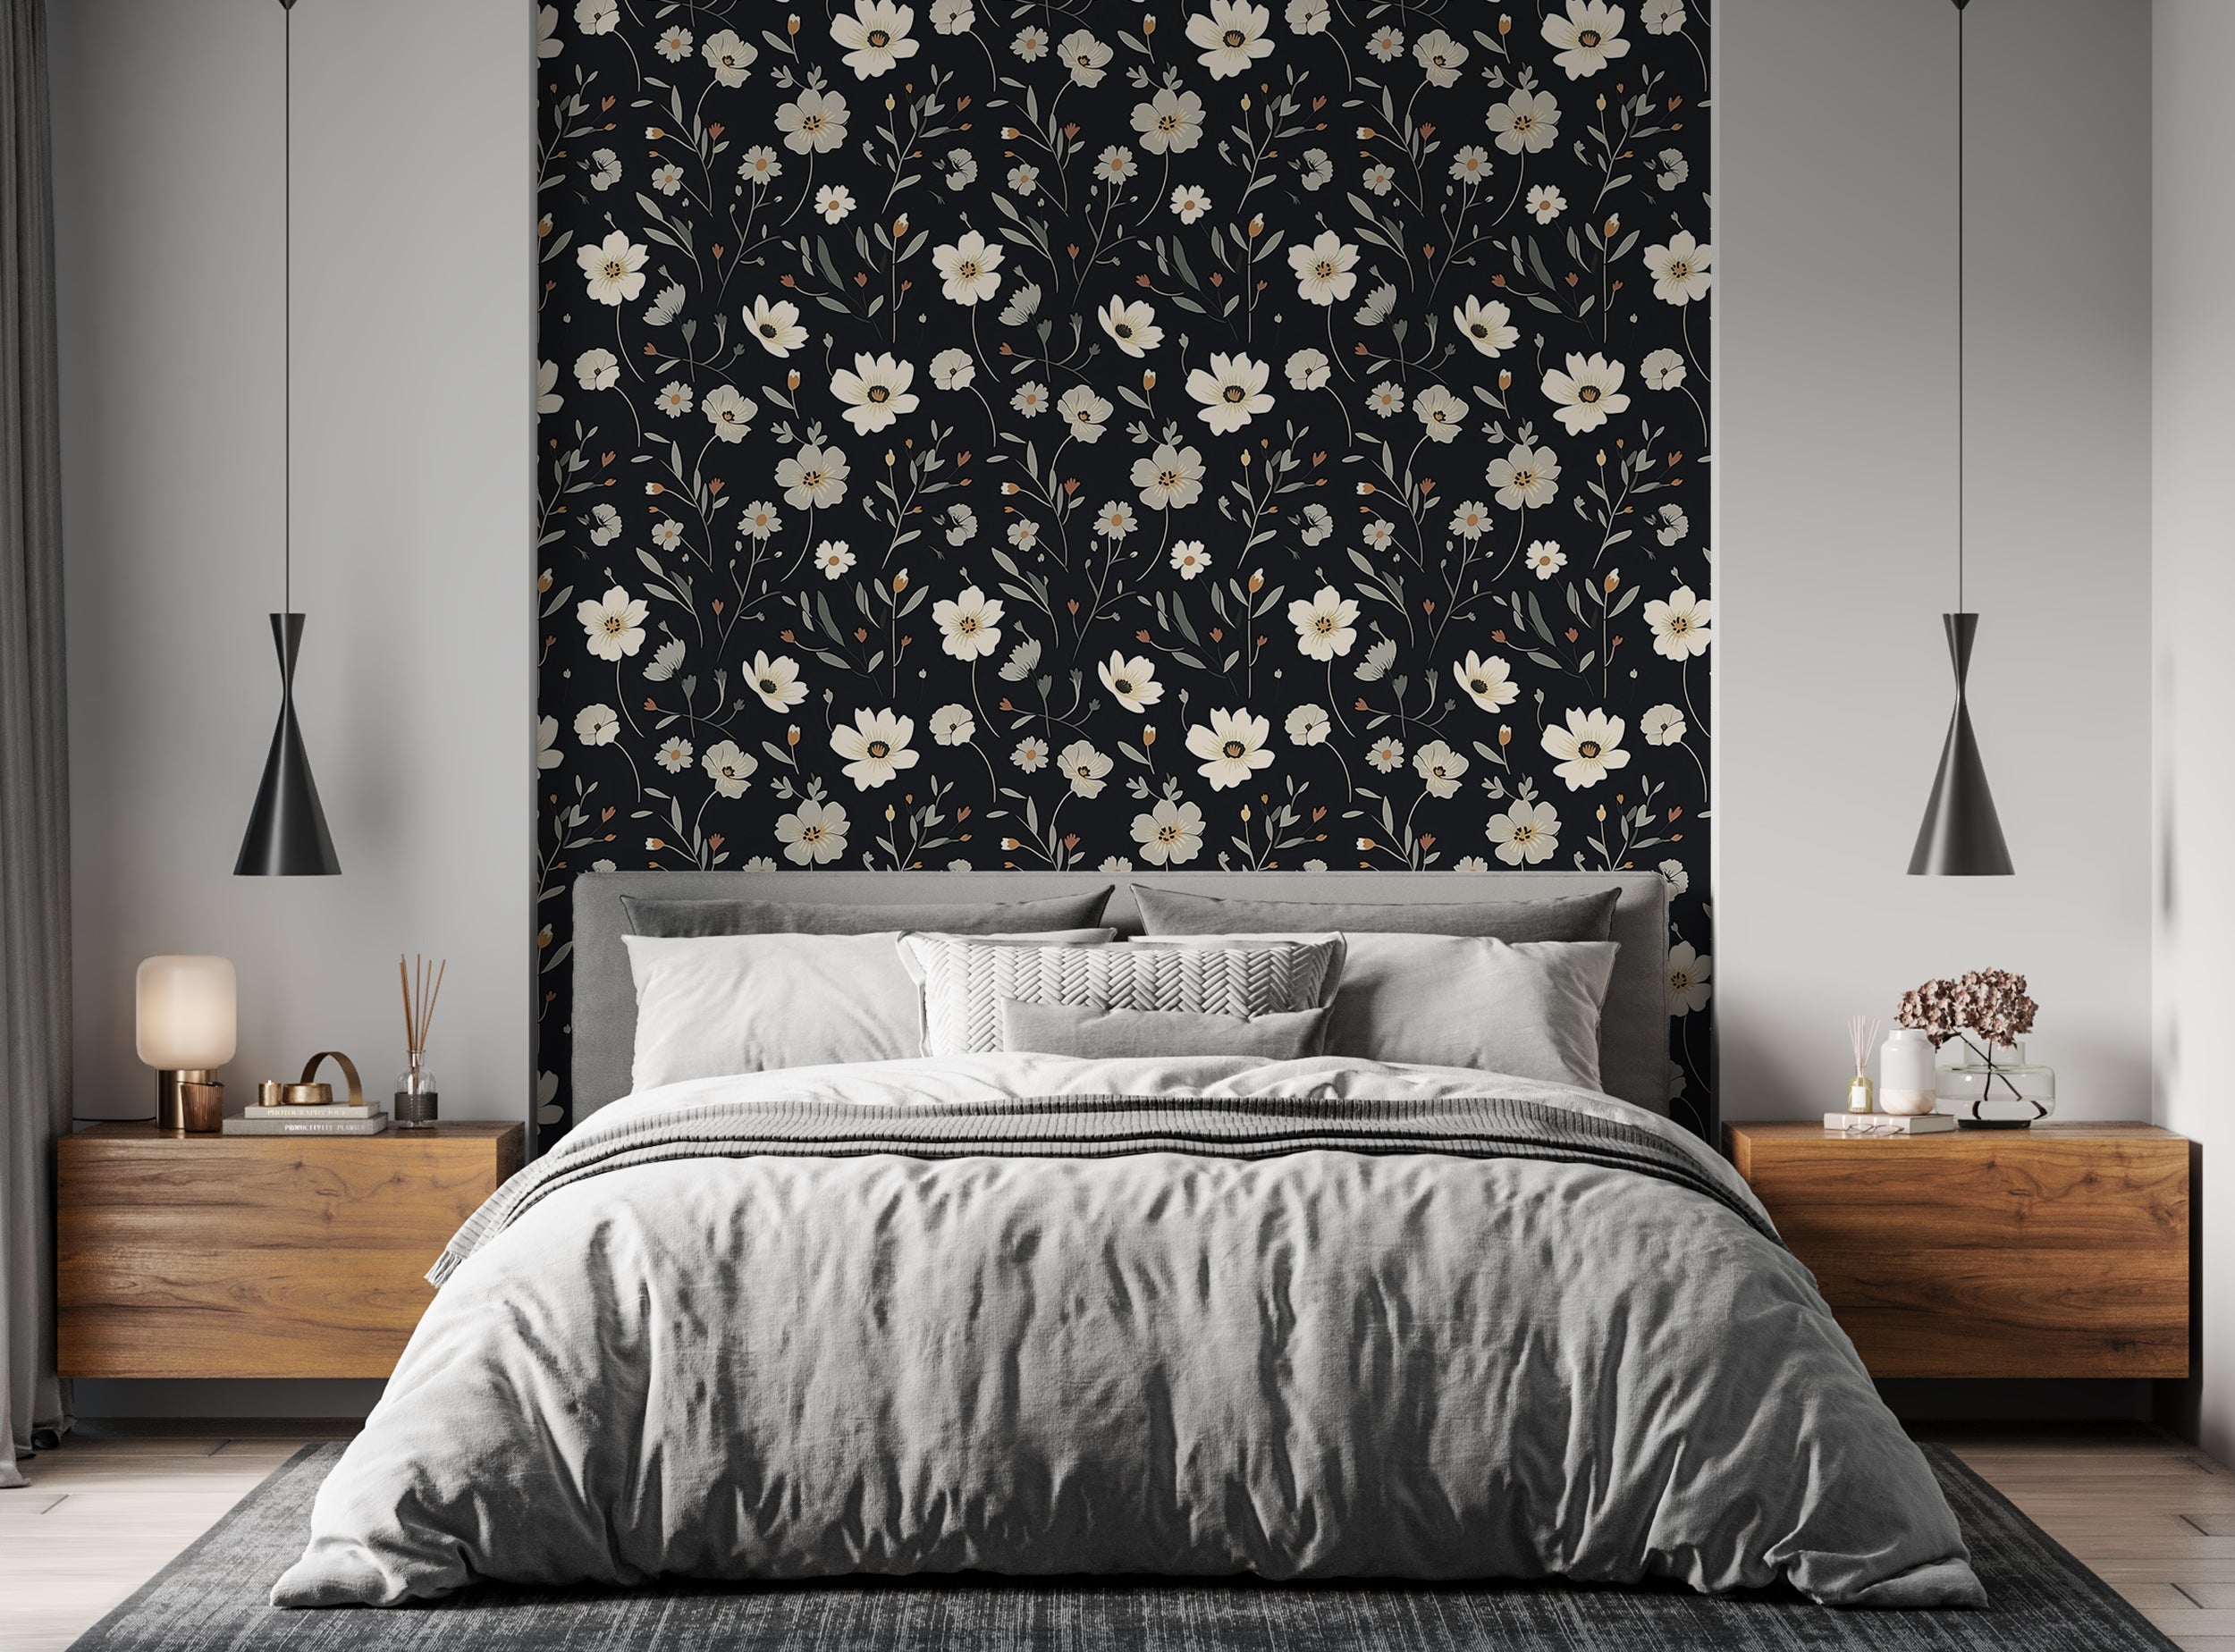 Transform Your Room with Dark Floral Wallpaper